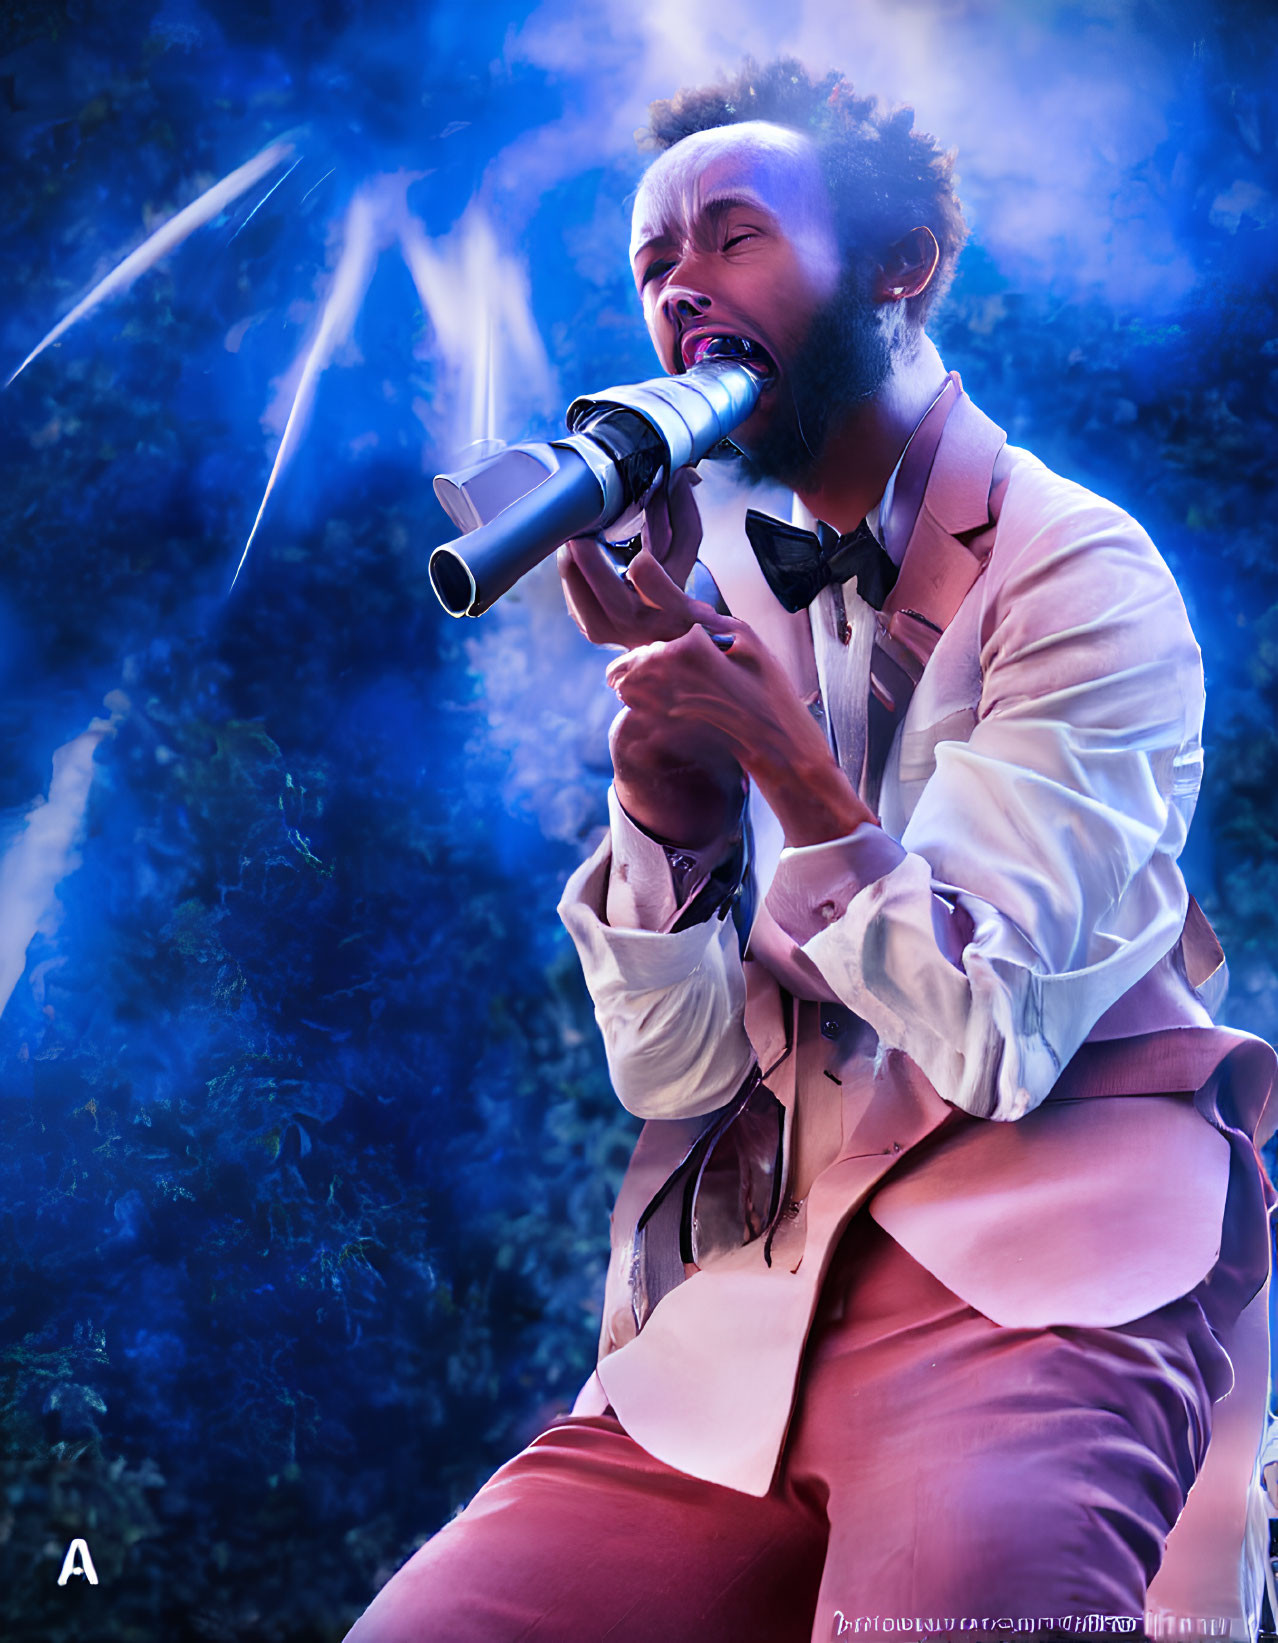 Male performer in cream jacket and bow tie singing on blue-lit stage